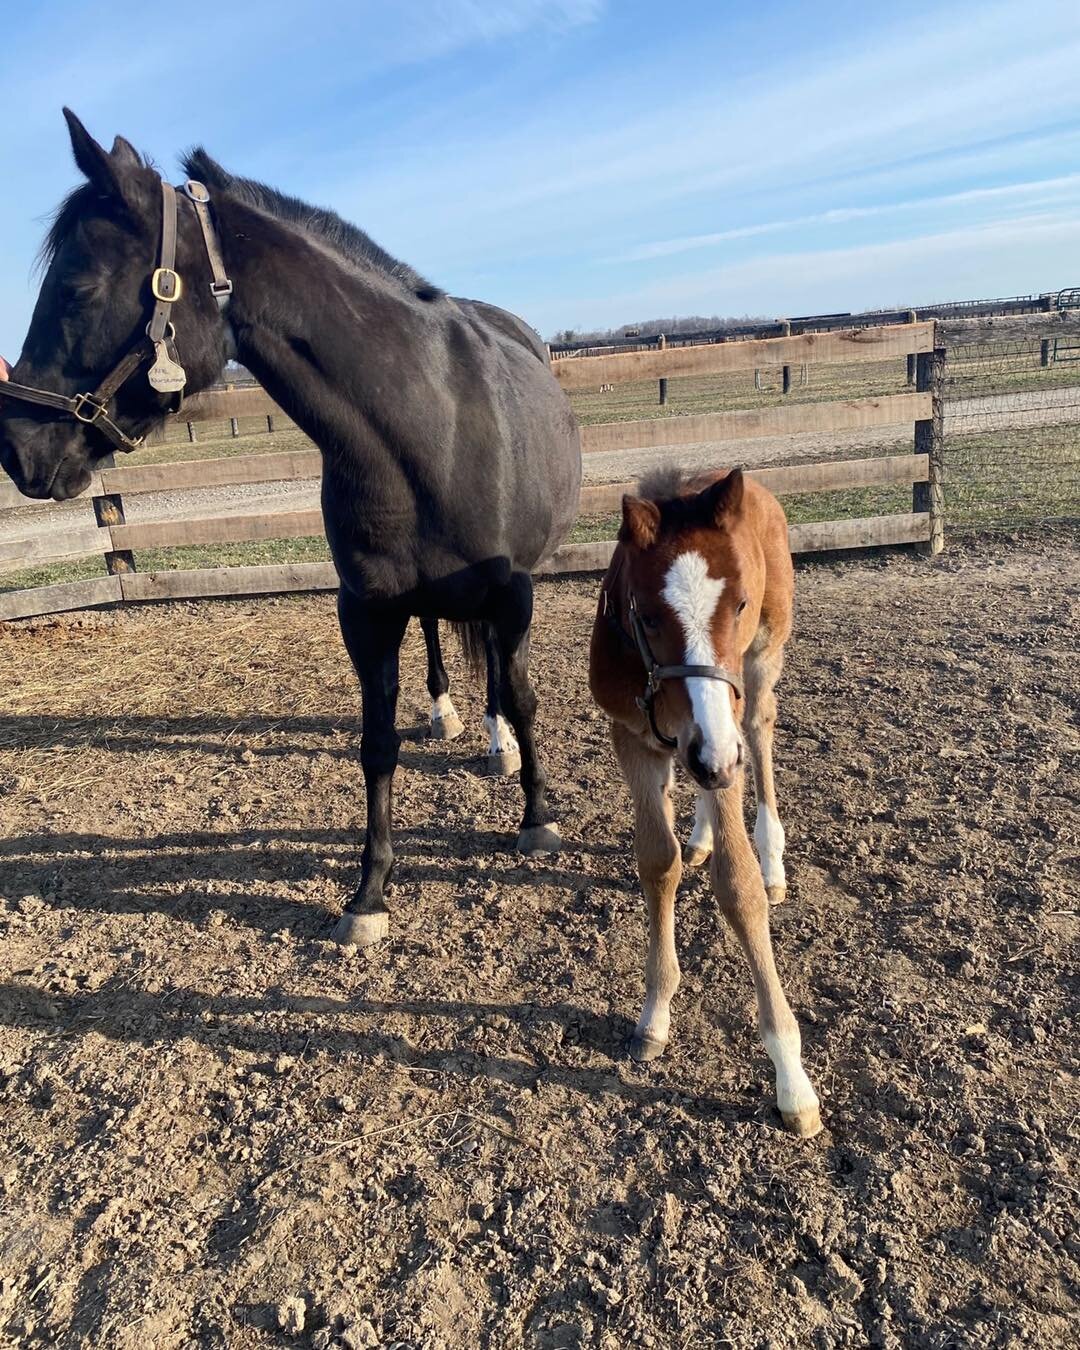 Happy Mother&rsquo;s Day to all of the mom&rsquo;s out there! Whether you are a human mom or a fur mom, we celebrate all that you do for your children. 

#equinespecialtyhospital #equinehospital #foals #foalsofinstagram #mare #twins #equine #equinebr